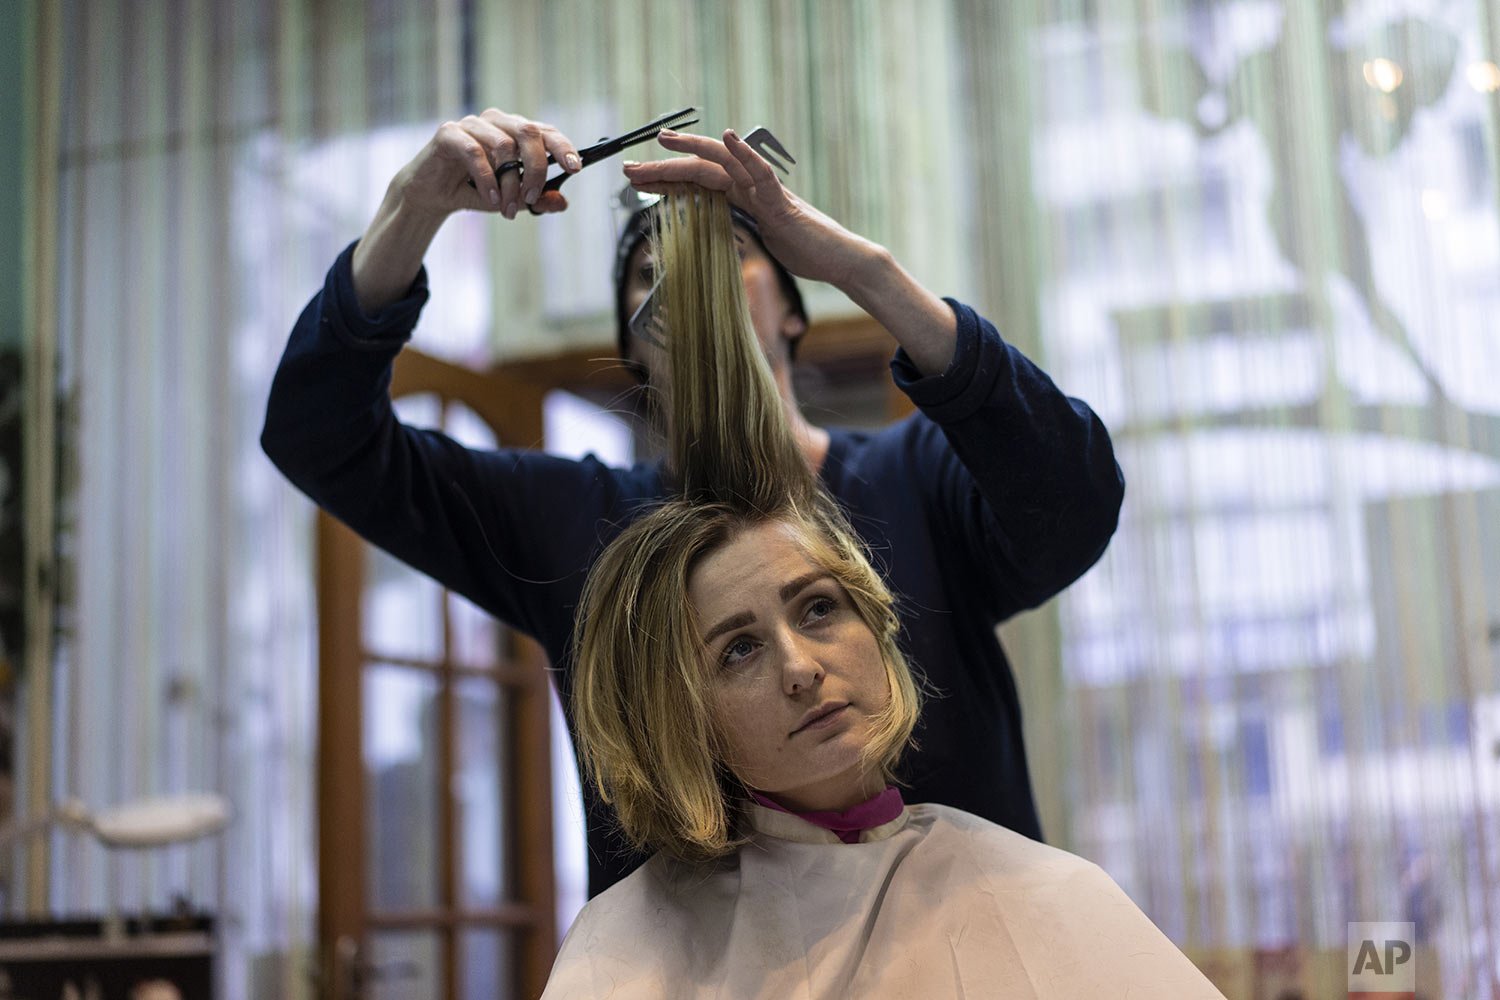  Maria Zolotuhina, 30, relaxes while Elena Kovalenko, 54, cuts her hair in "Figaro" hairdressing in Kyiv, Ukraine, Saturday, March 26, 2022. With the invasion now in its second month, Russian forces have seemingly stalled on many fronts and are even 